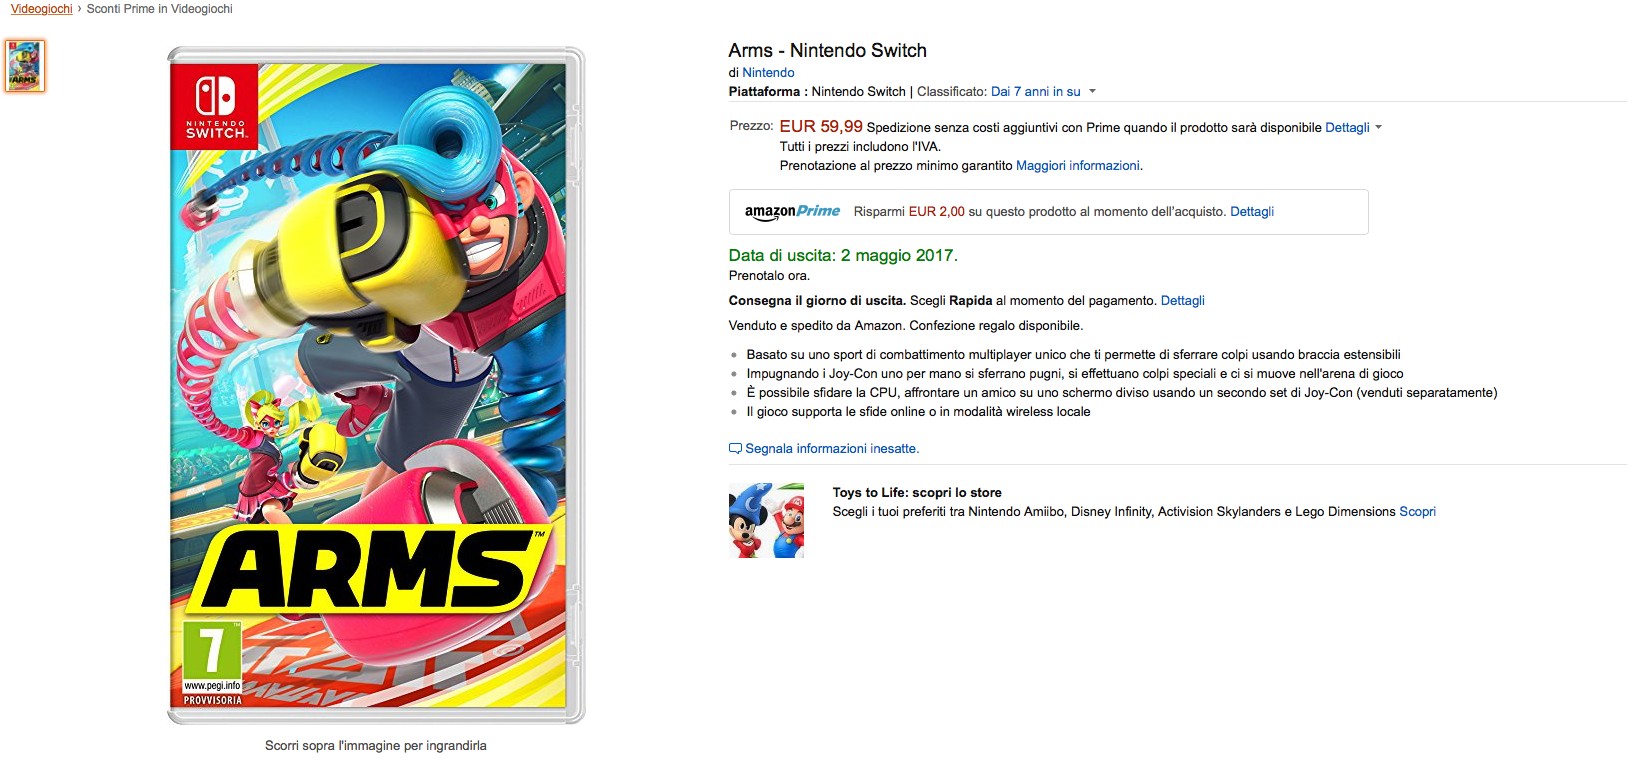 http://www.vgn.it/wp-content/uploads/2017/03/arms_releasedate_amazonIT.jpg